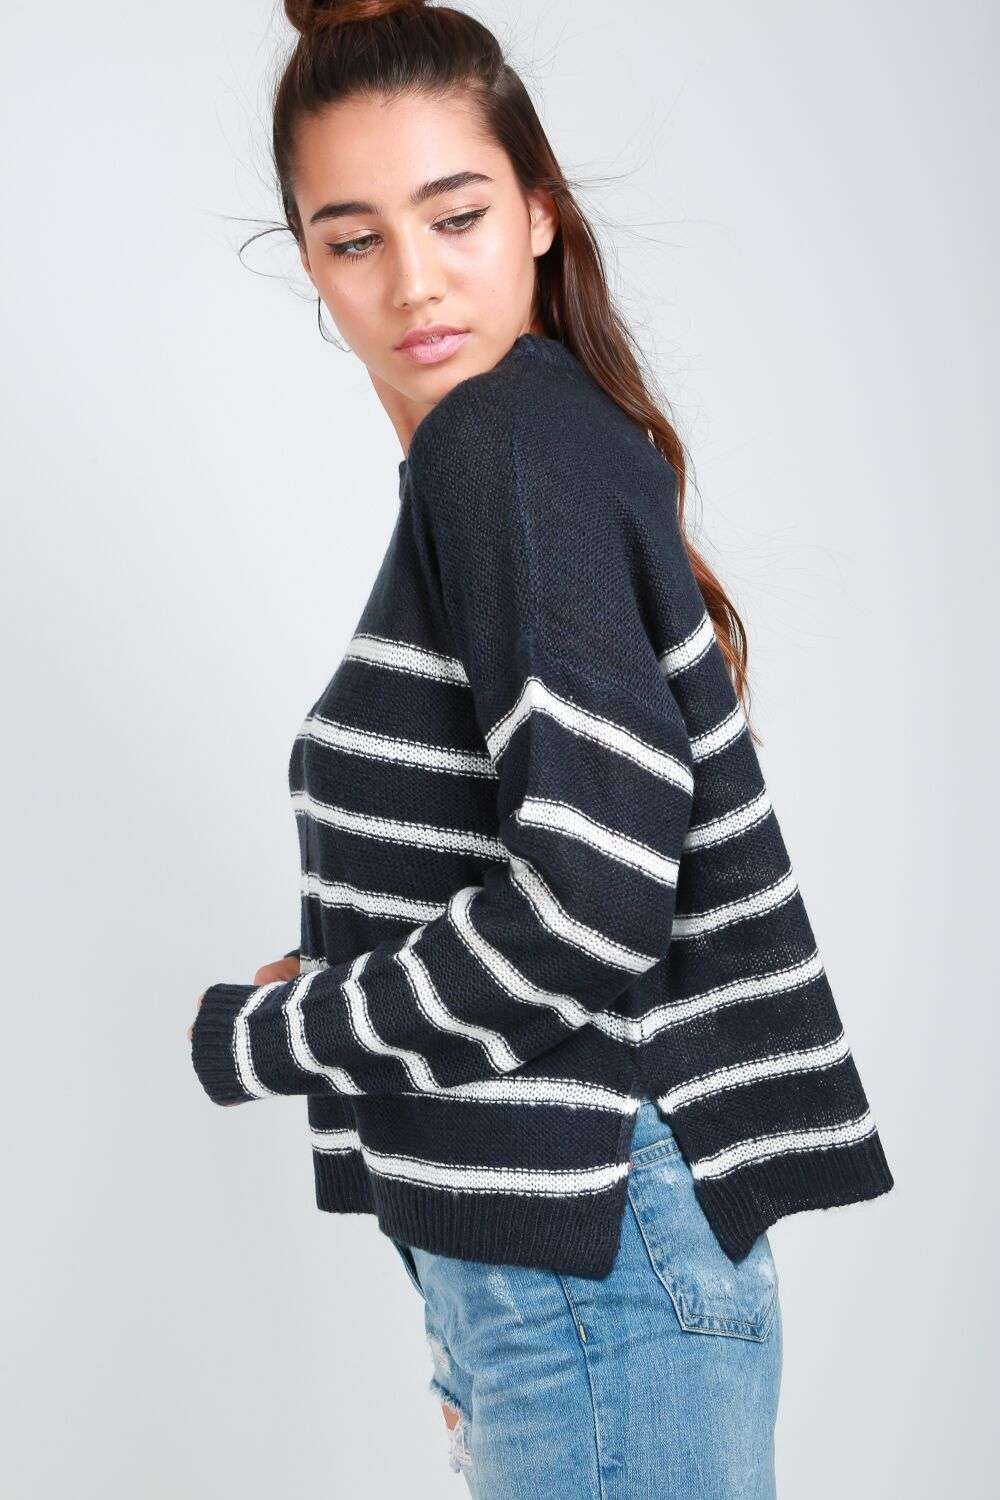 Maria Striped Long Sleeve Knitted Jumper - bejealous-com